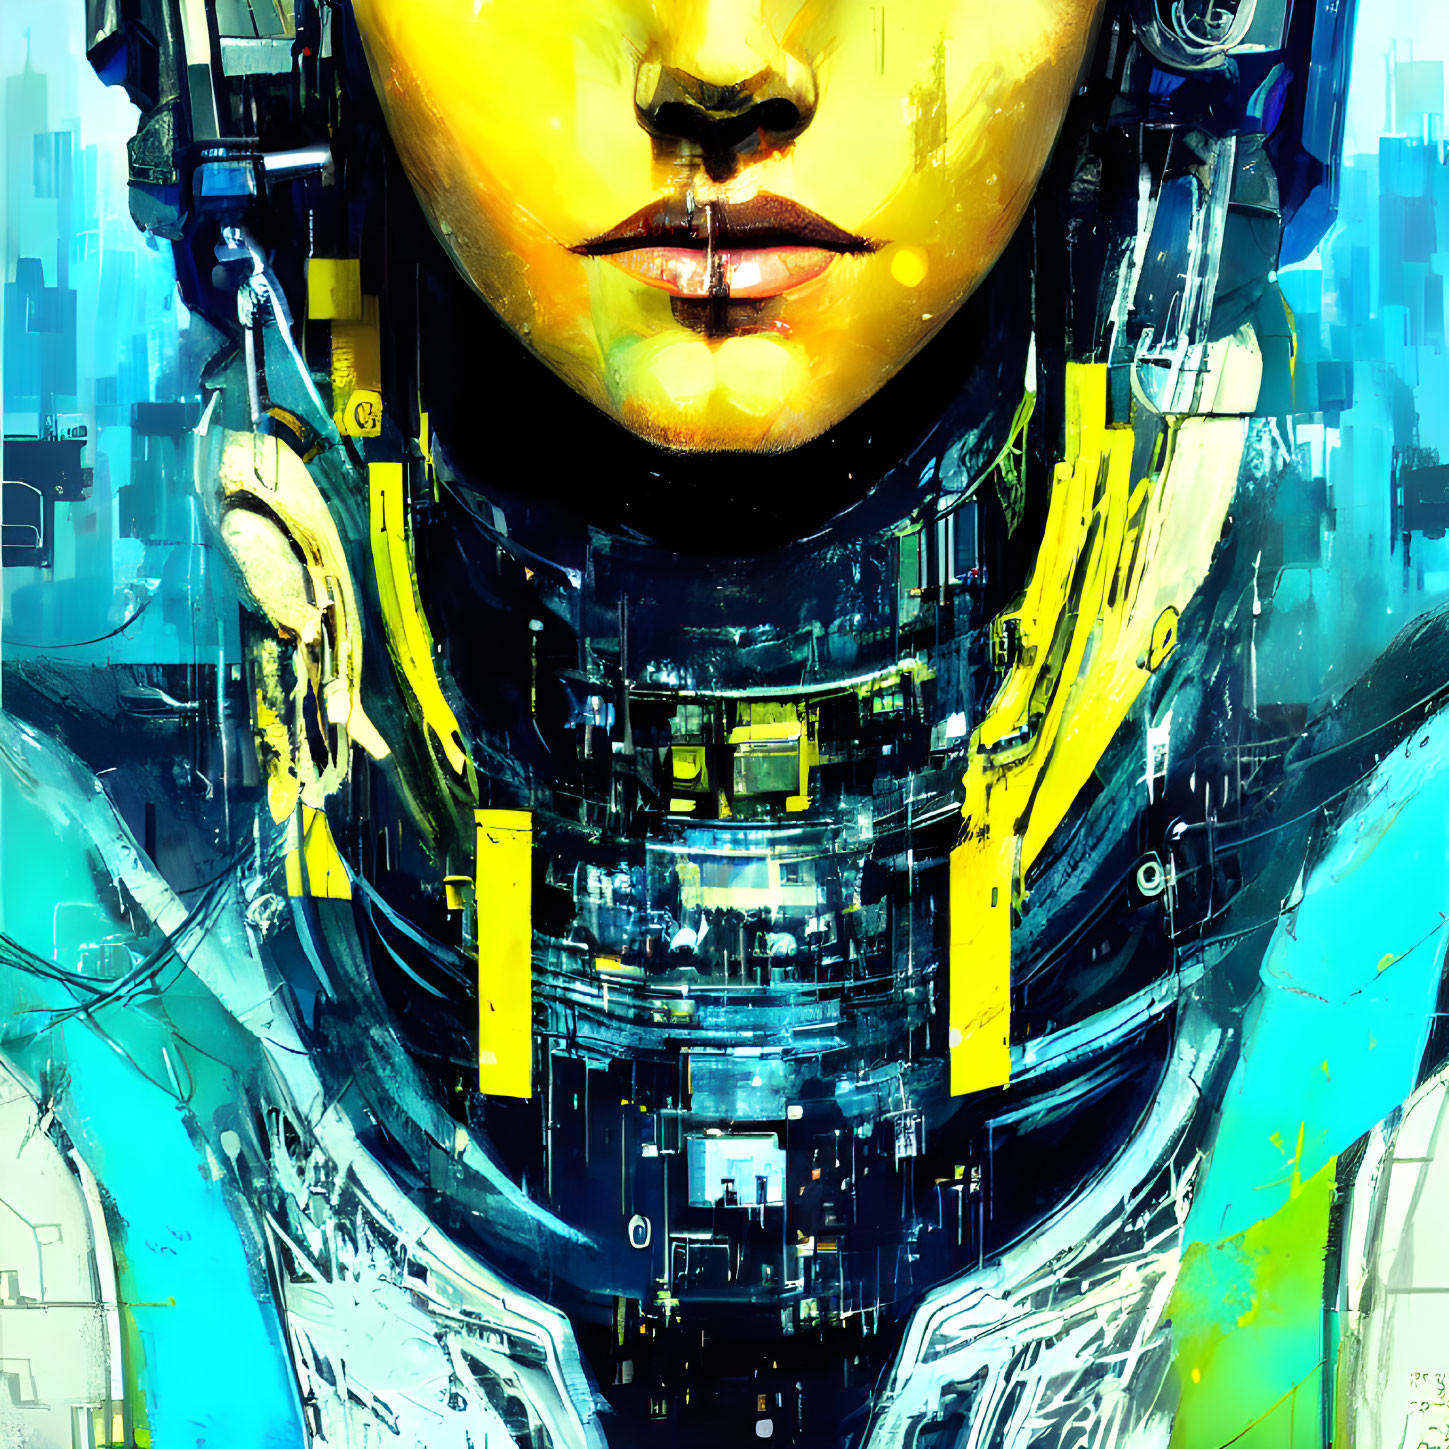 Detailed futuristic cybernetic enhancements on person in digital art